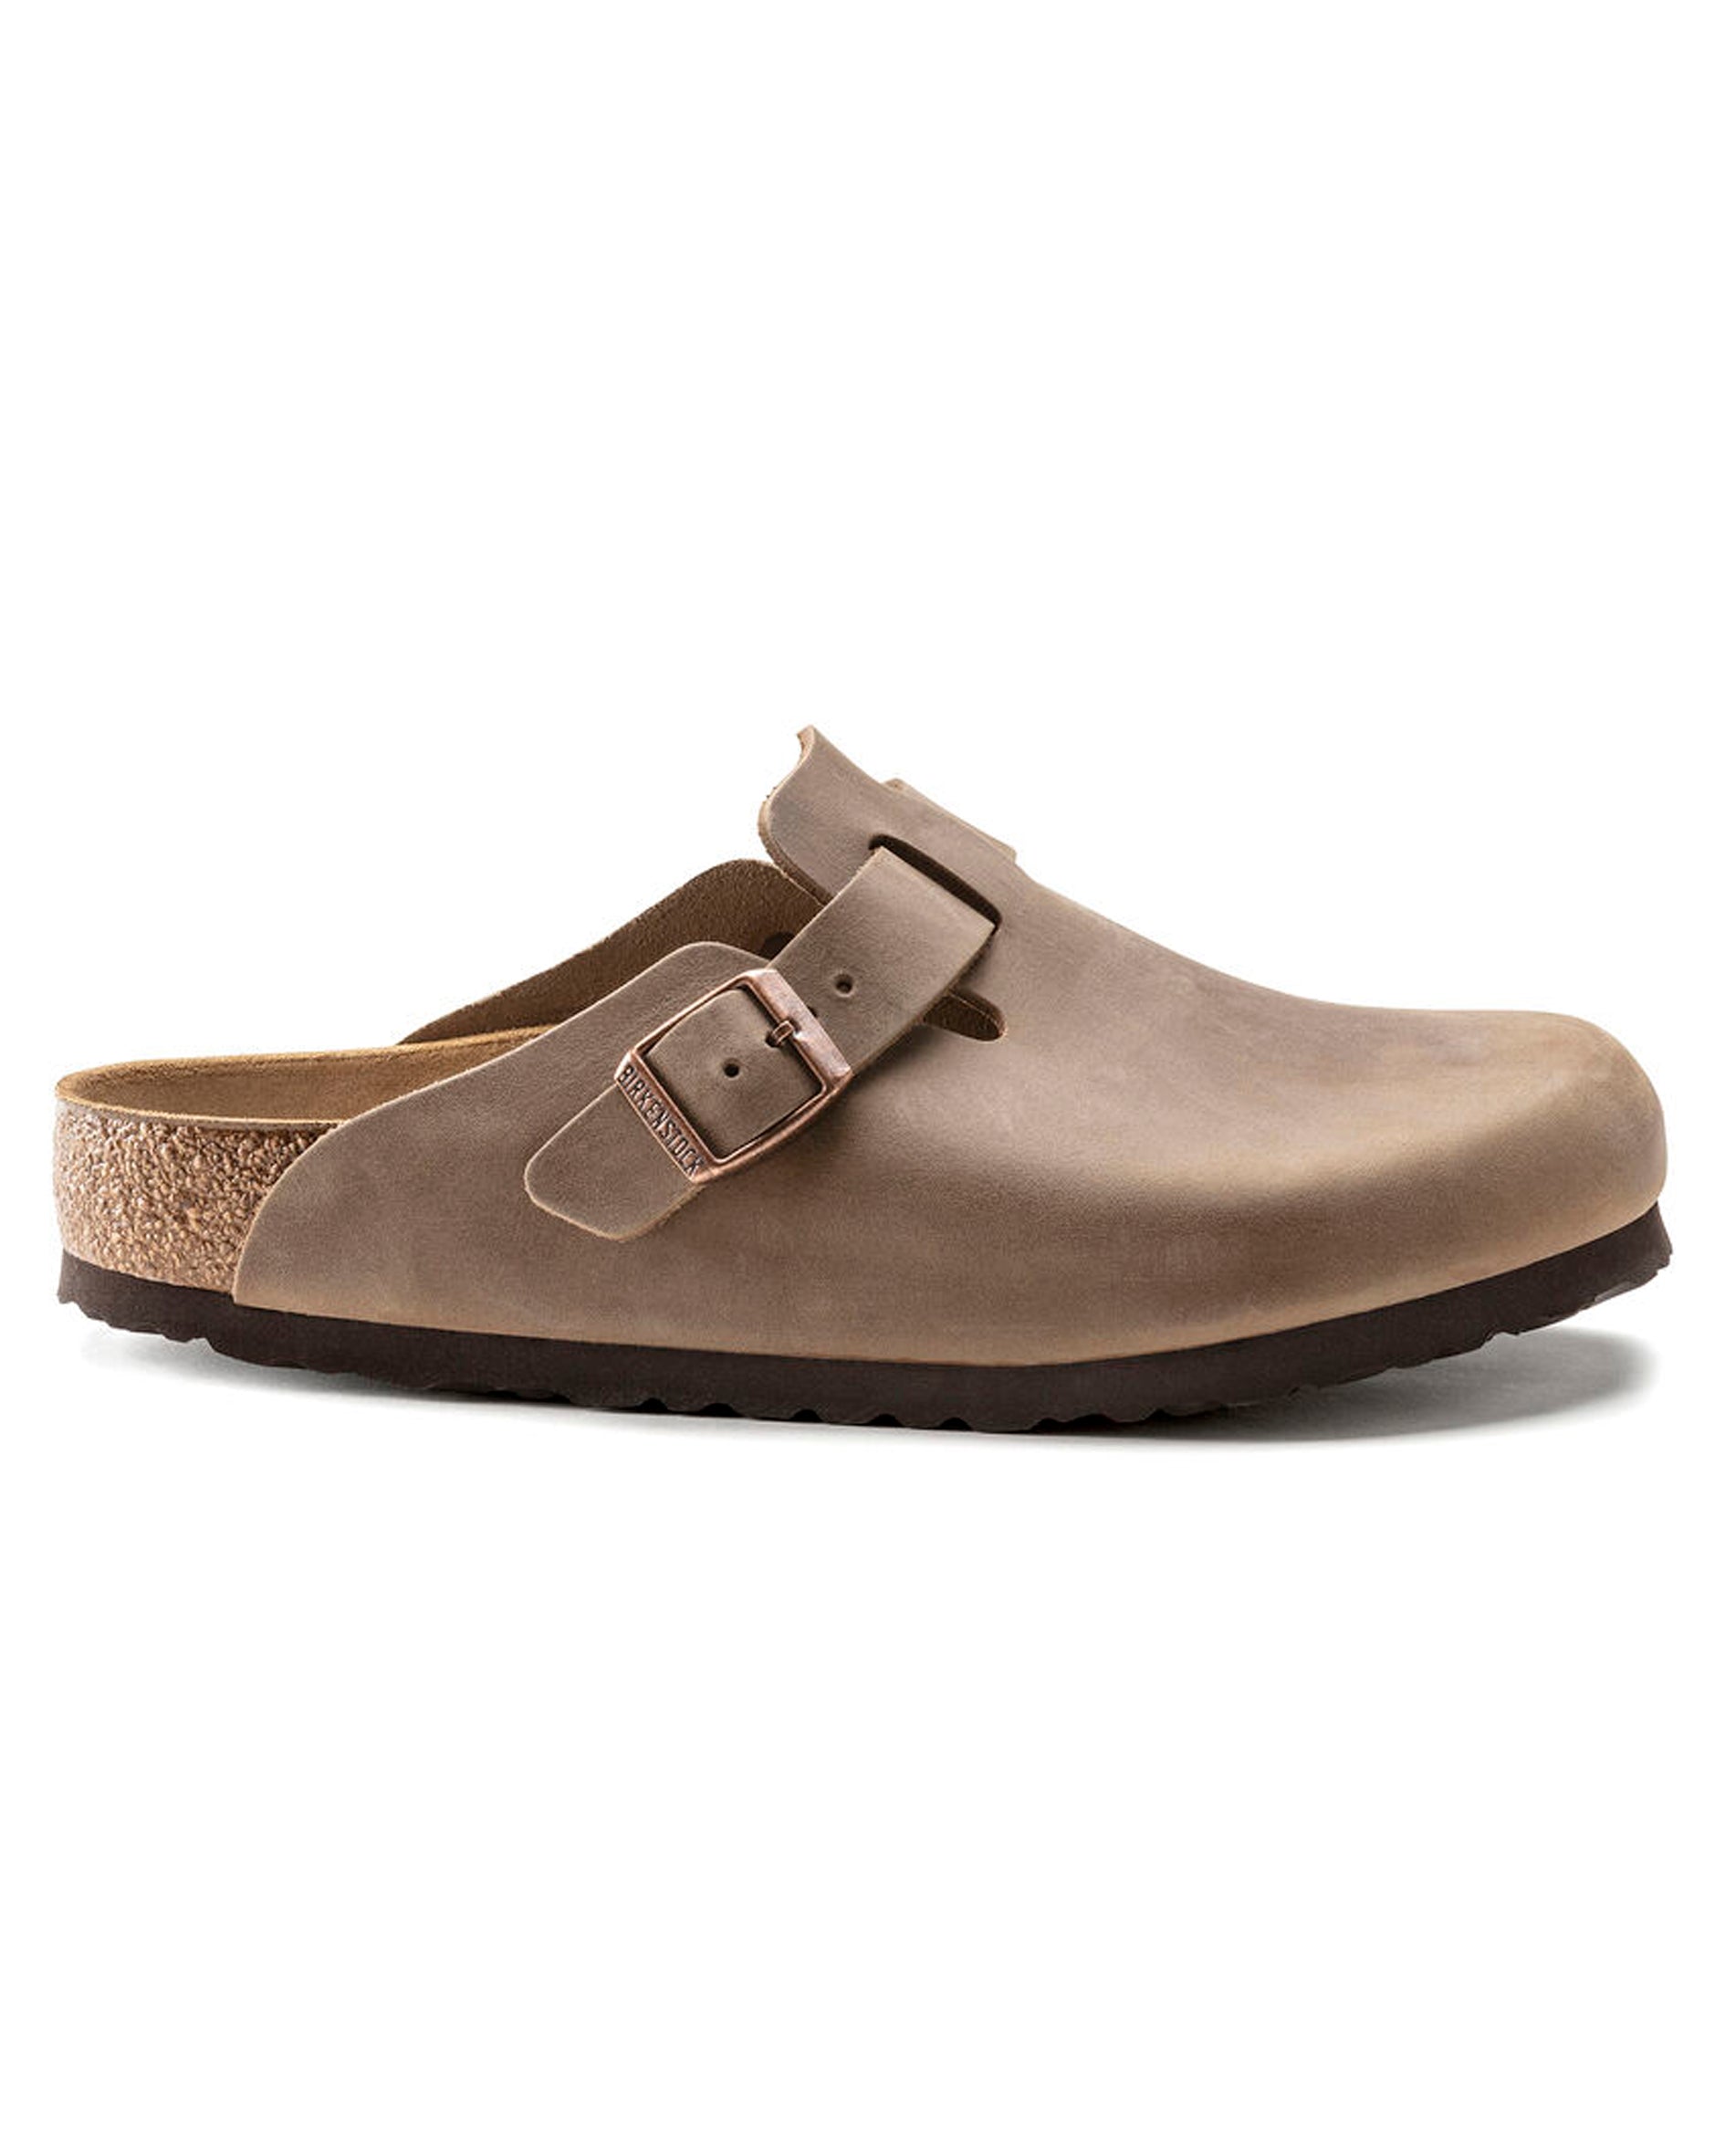 Boston Tabacco Brown Oiled Leather Clogs